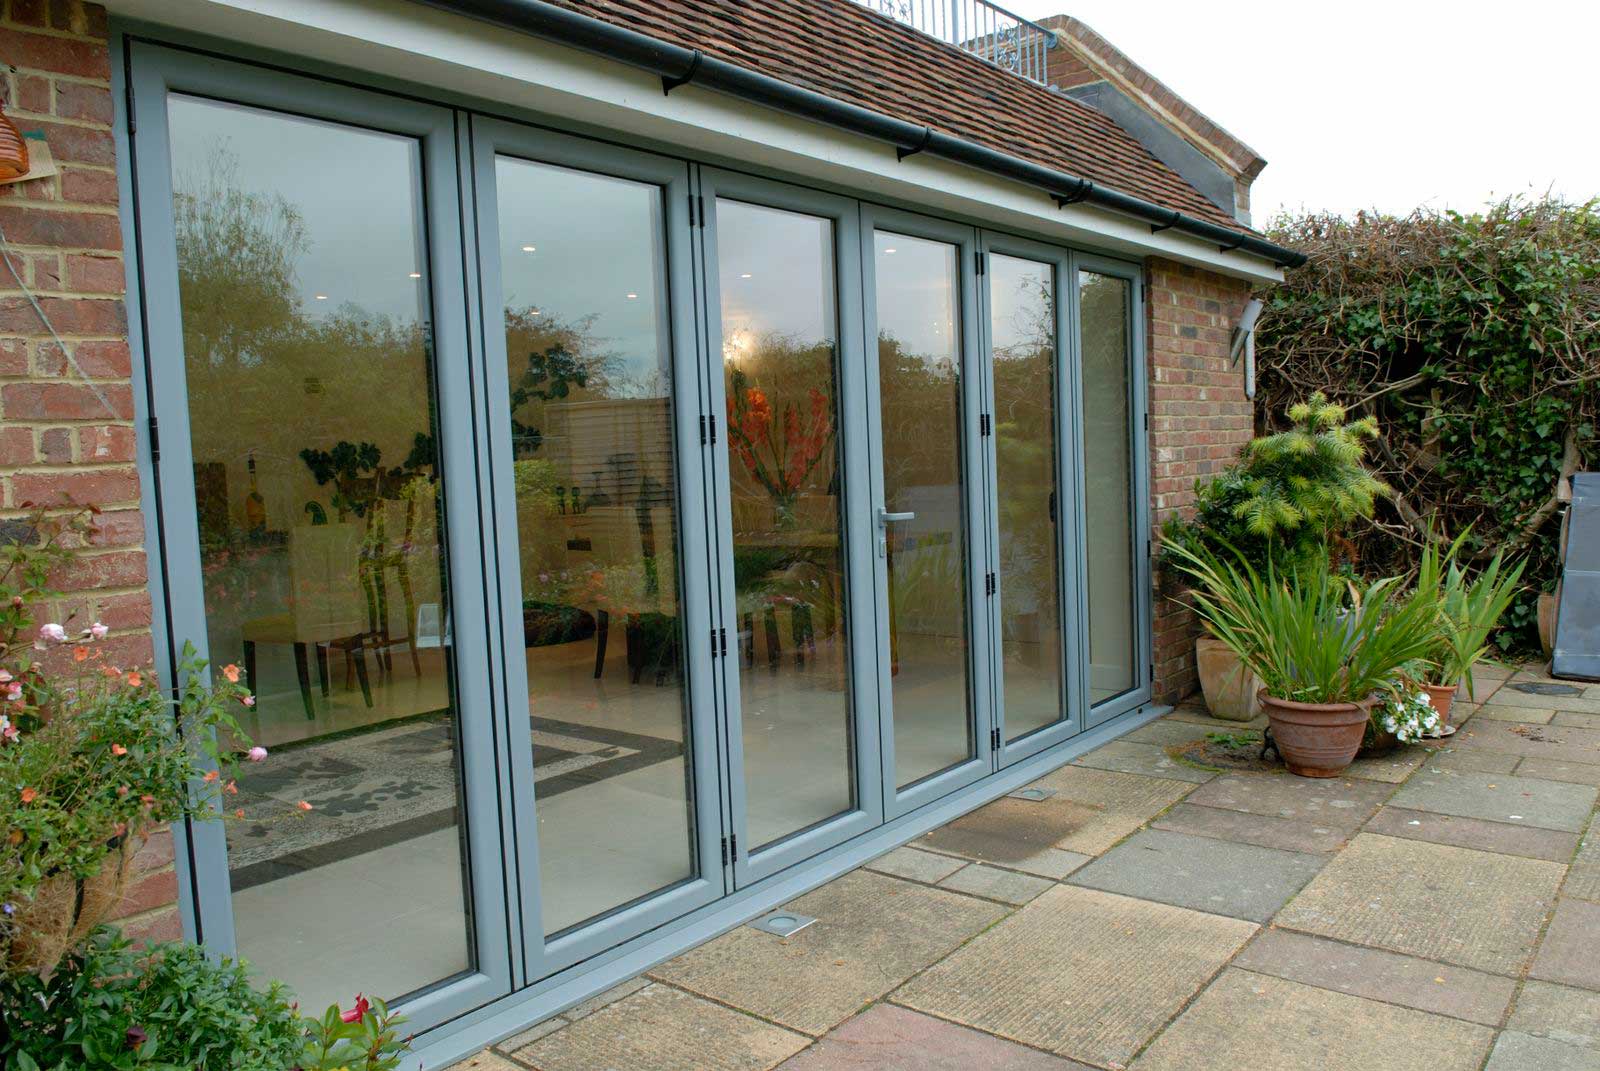 How Much Are Bifold Doors?